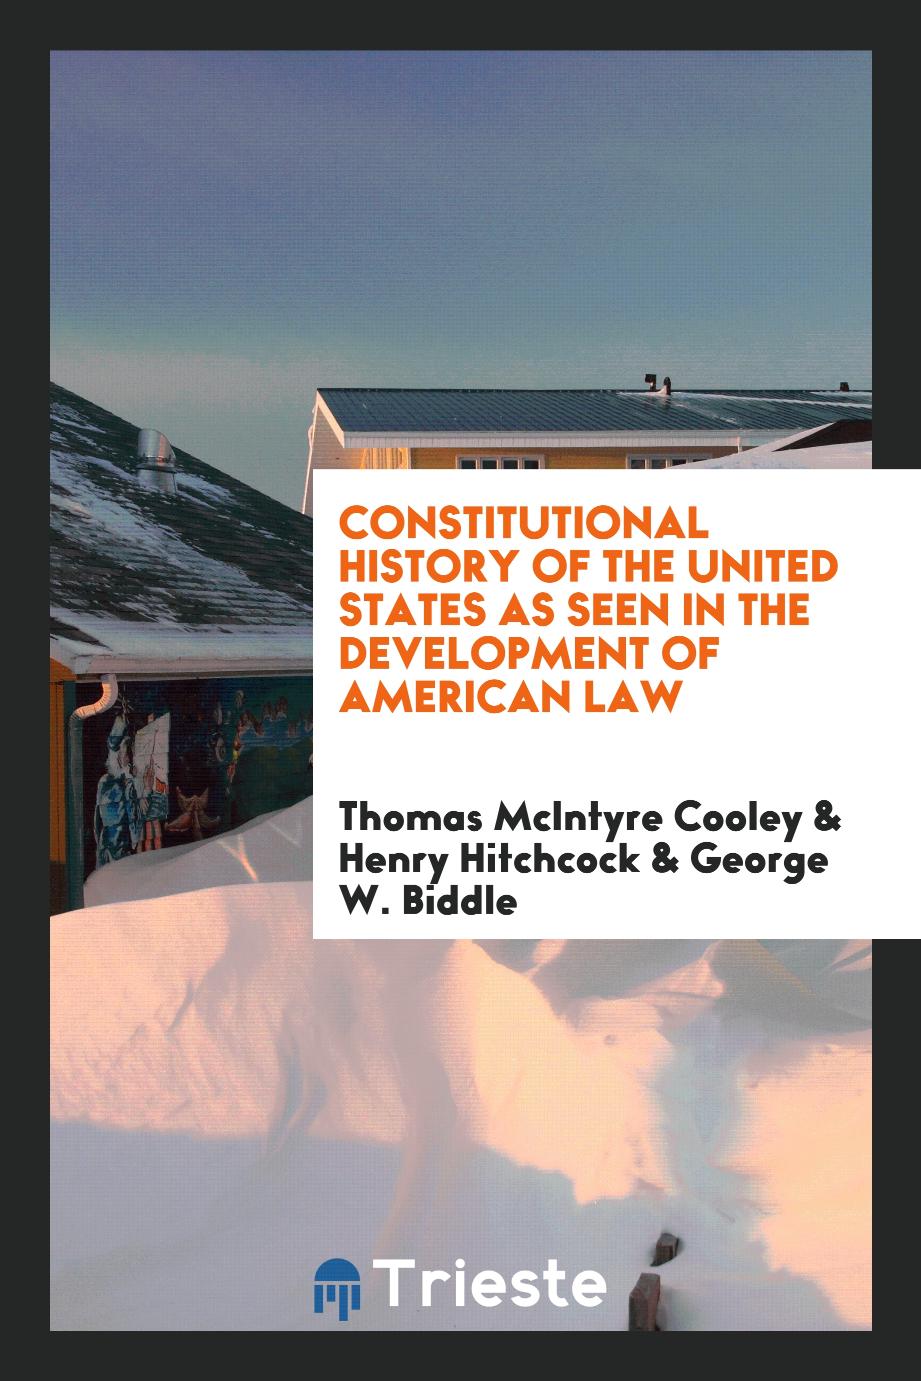 Constitutional History of the United States as Seen in the Development of American Law